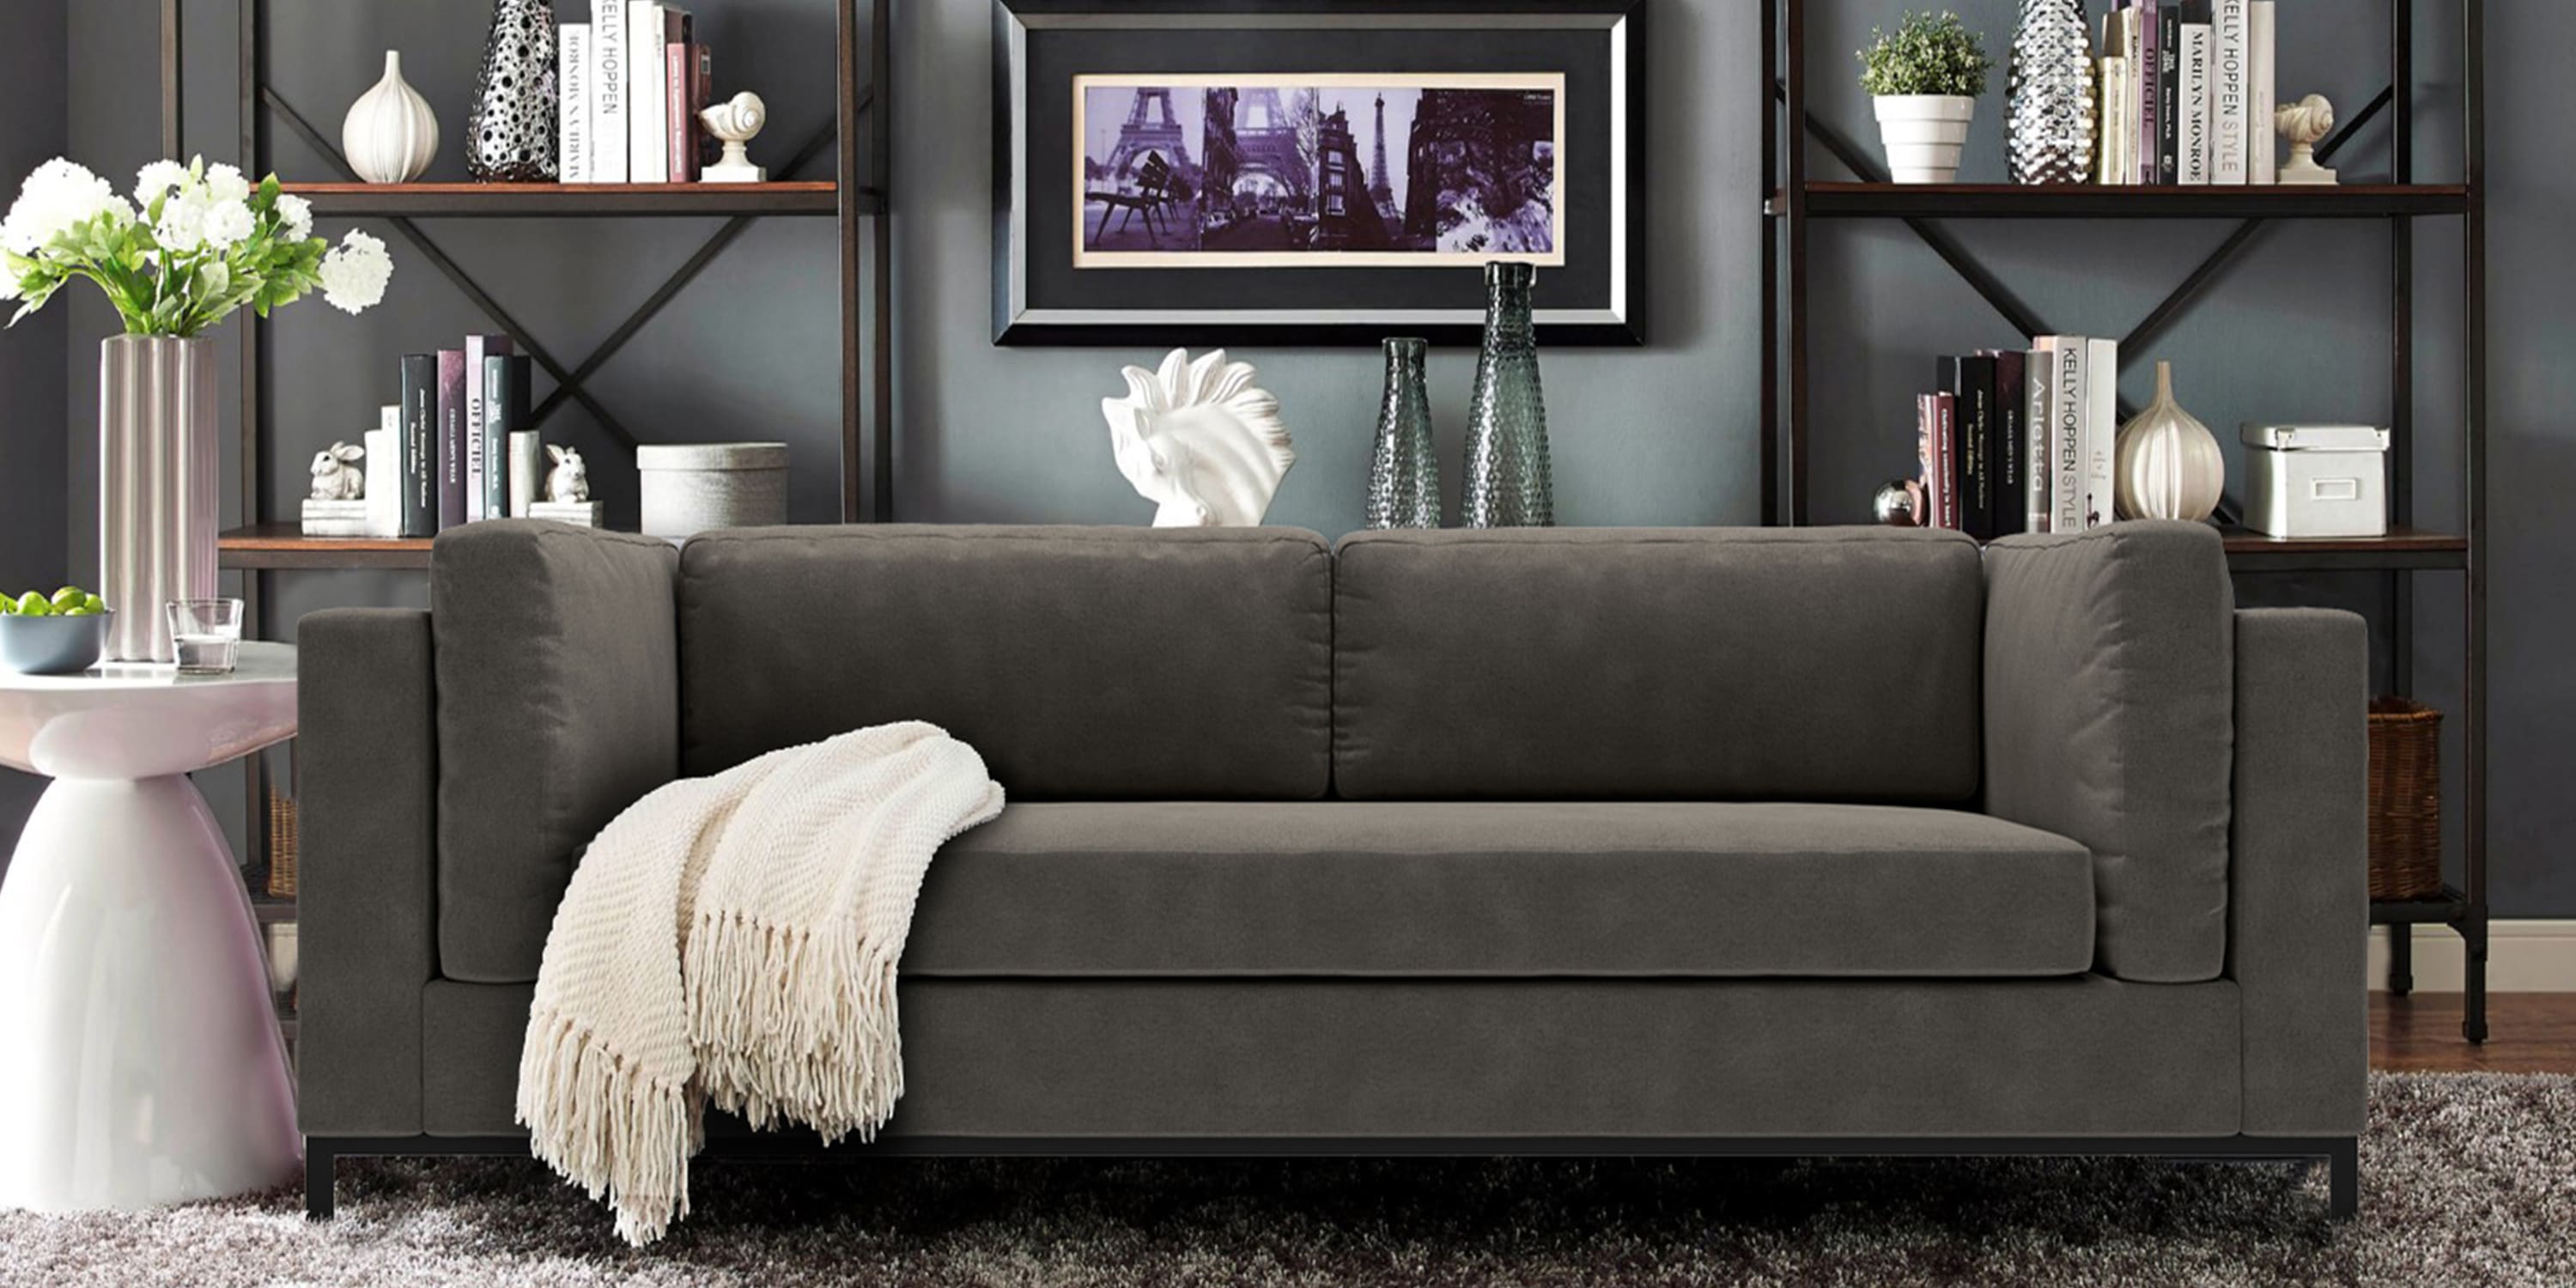 10 Best Canadian Made Sofas To Check, What Are The Best Canadian Made Sofas